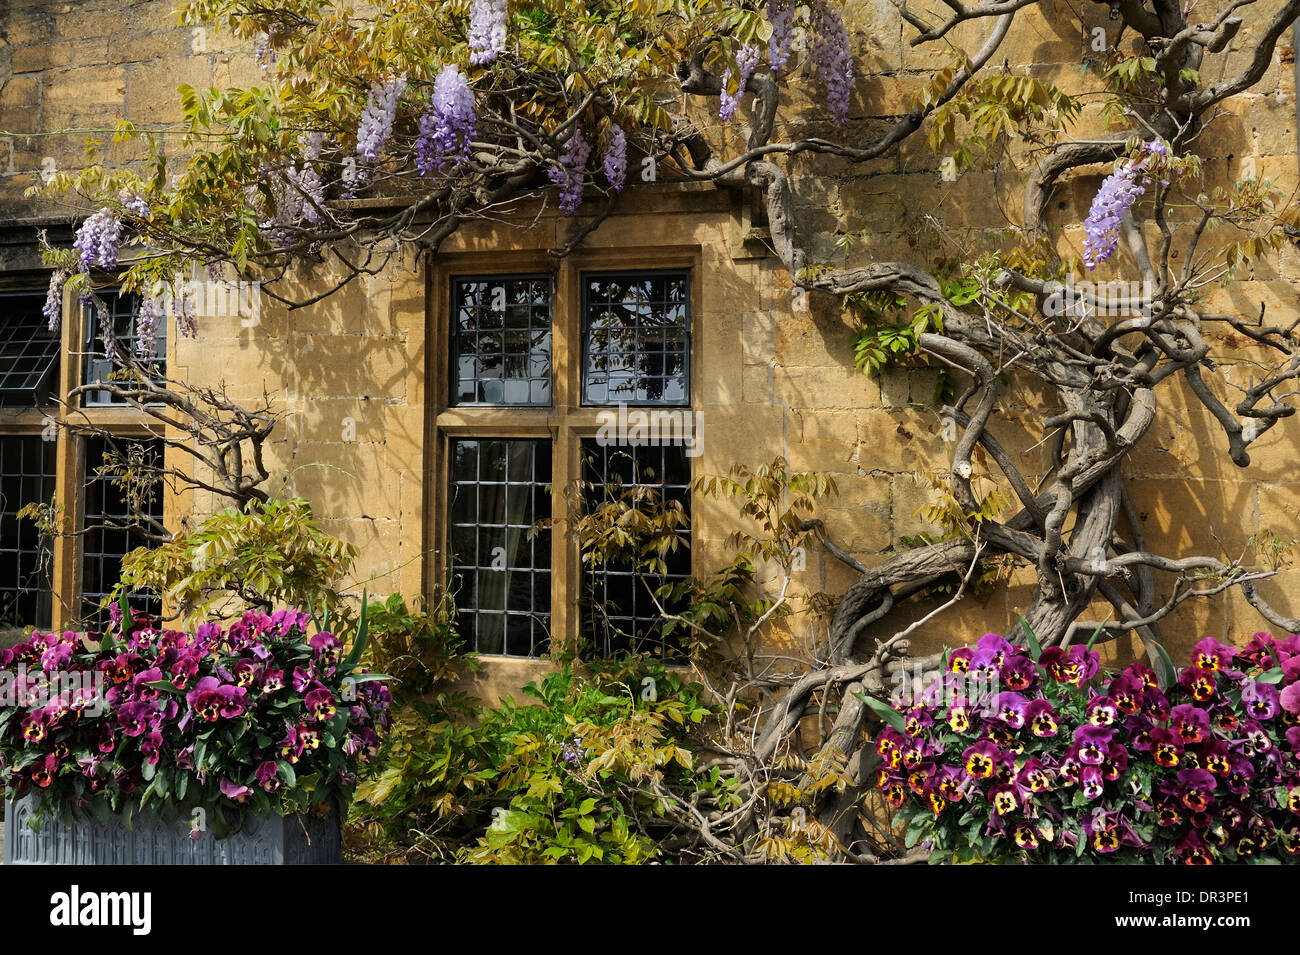 Purple flowers outside a building, High Street, Broadway, The Cotswolds, Worcestershire, England, United Kingdom, UK, Europe Stock Photo